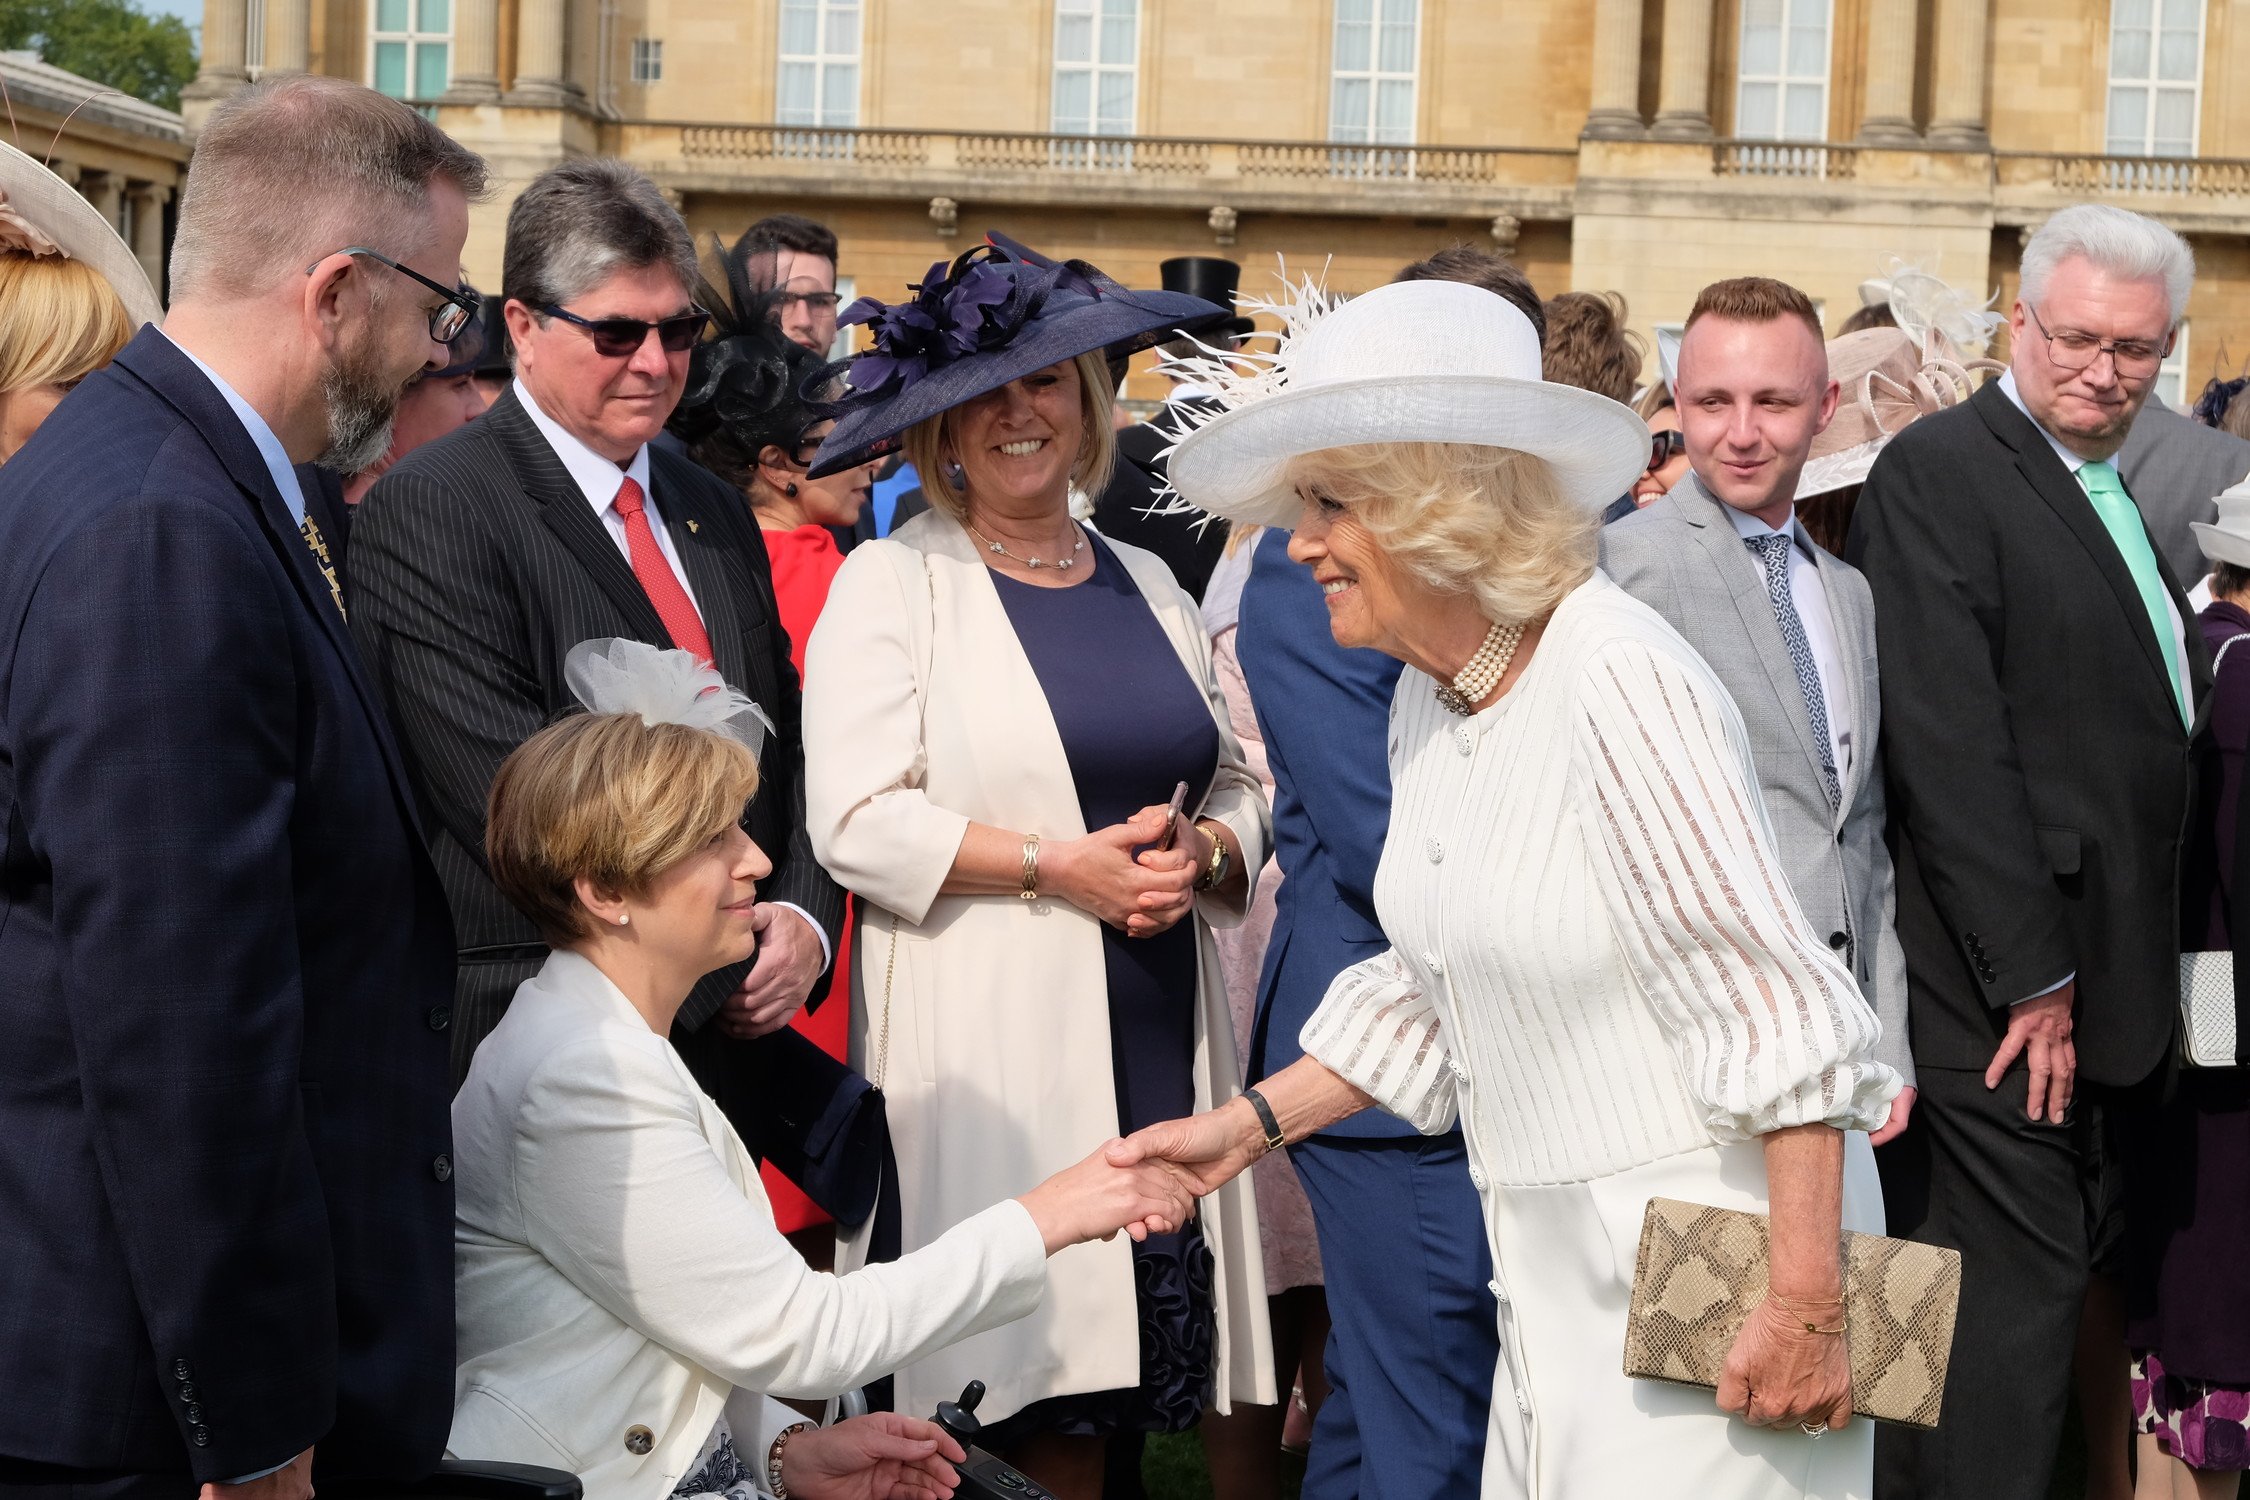 Her Majesty The Queen Consort attending a Garden Party at Buckingham Palace